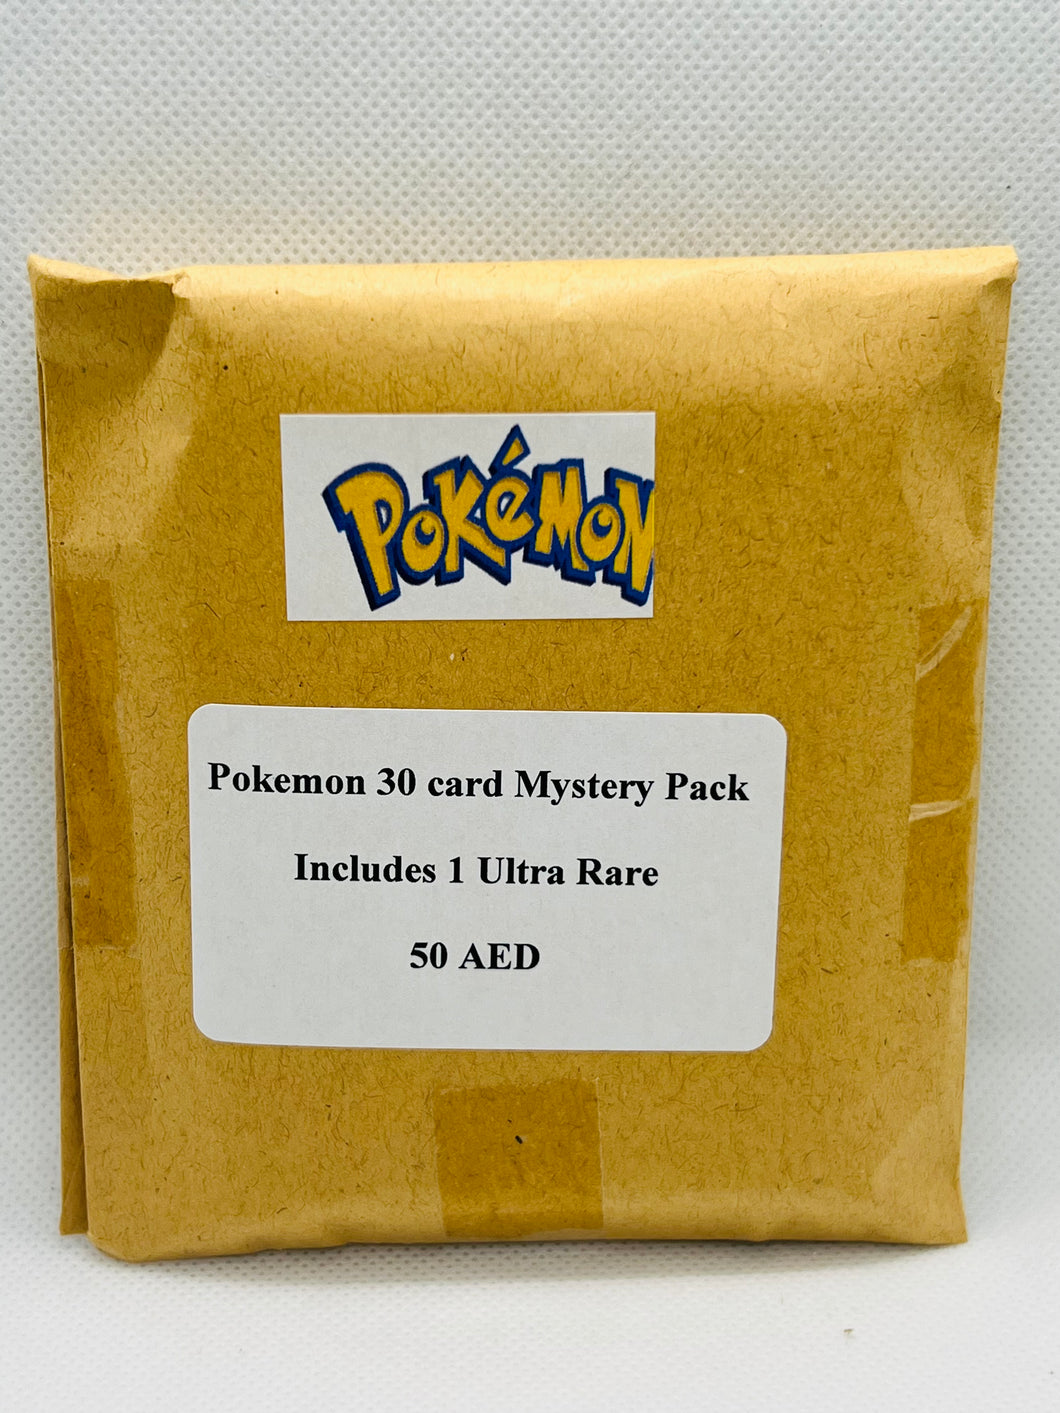 Pokemon 30 card mystery pack (Includes 1 Ultra Rare)